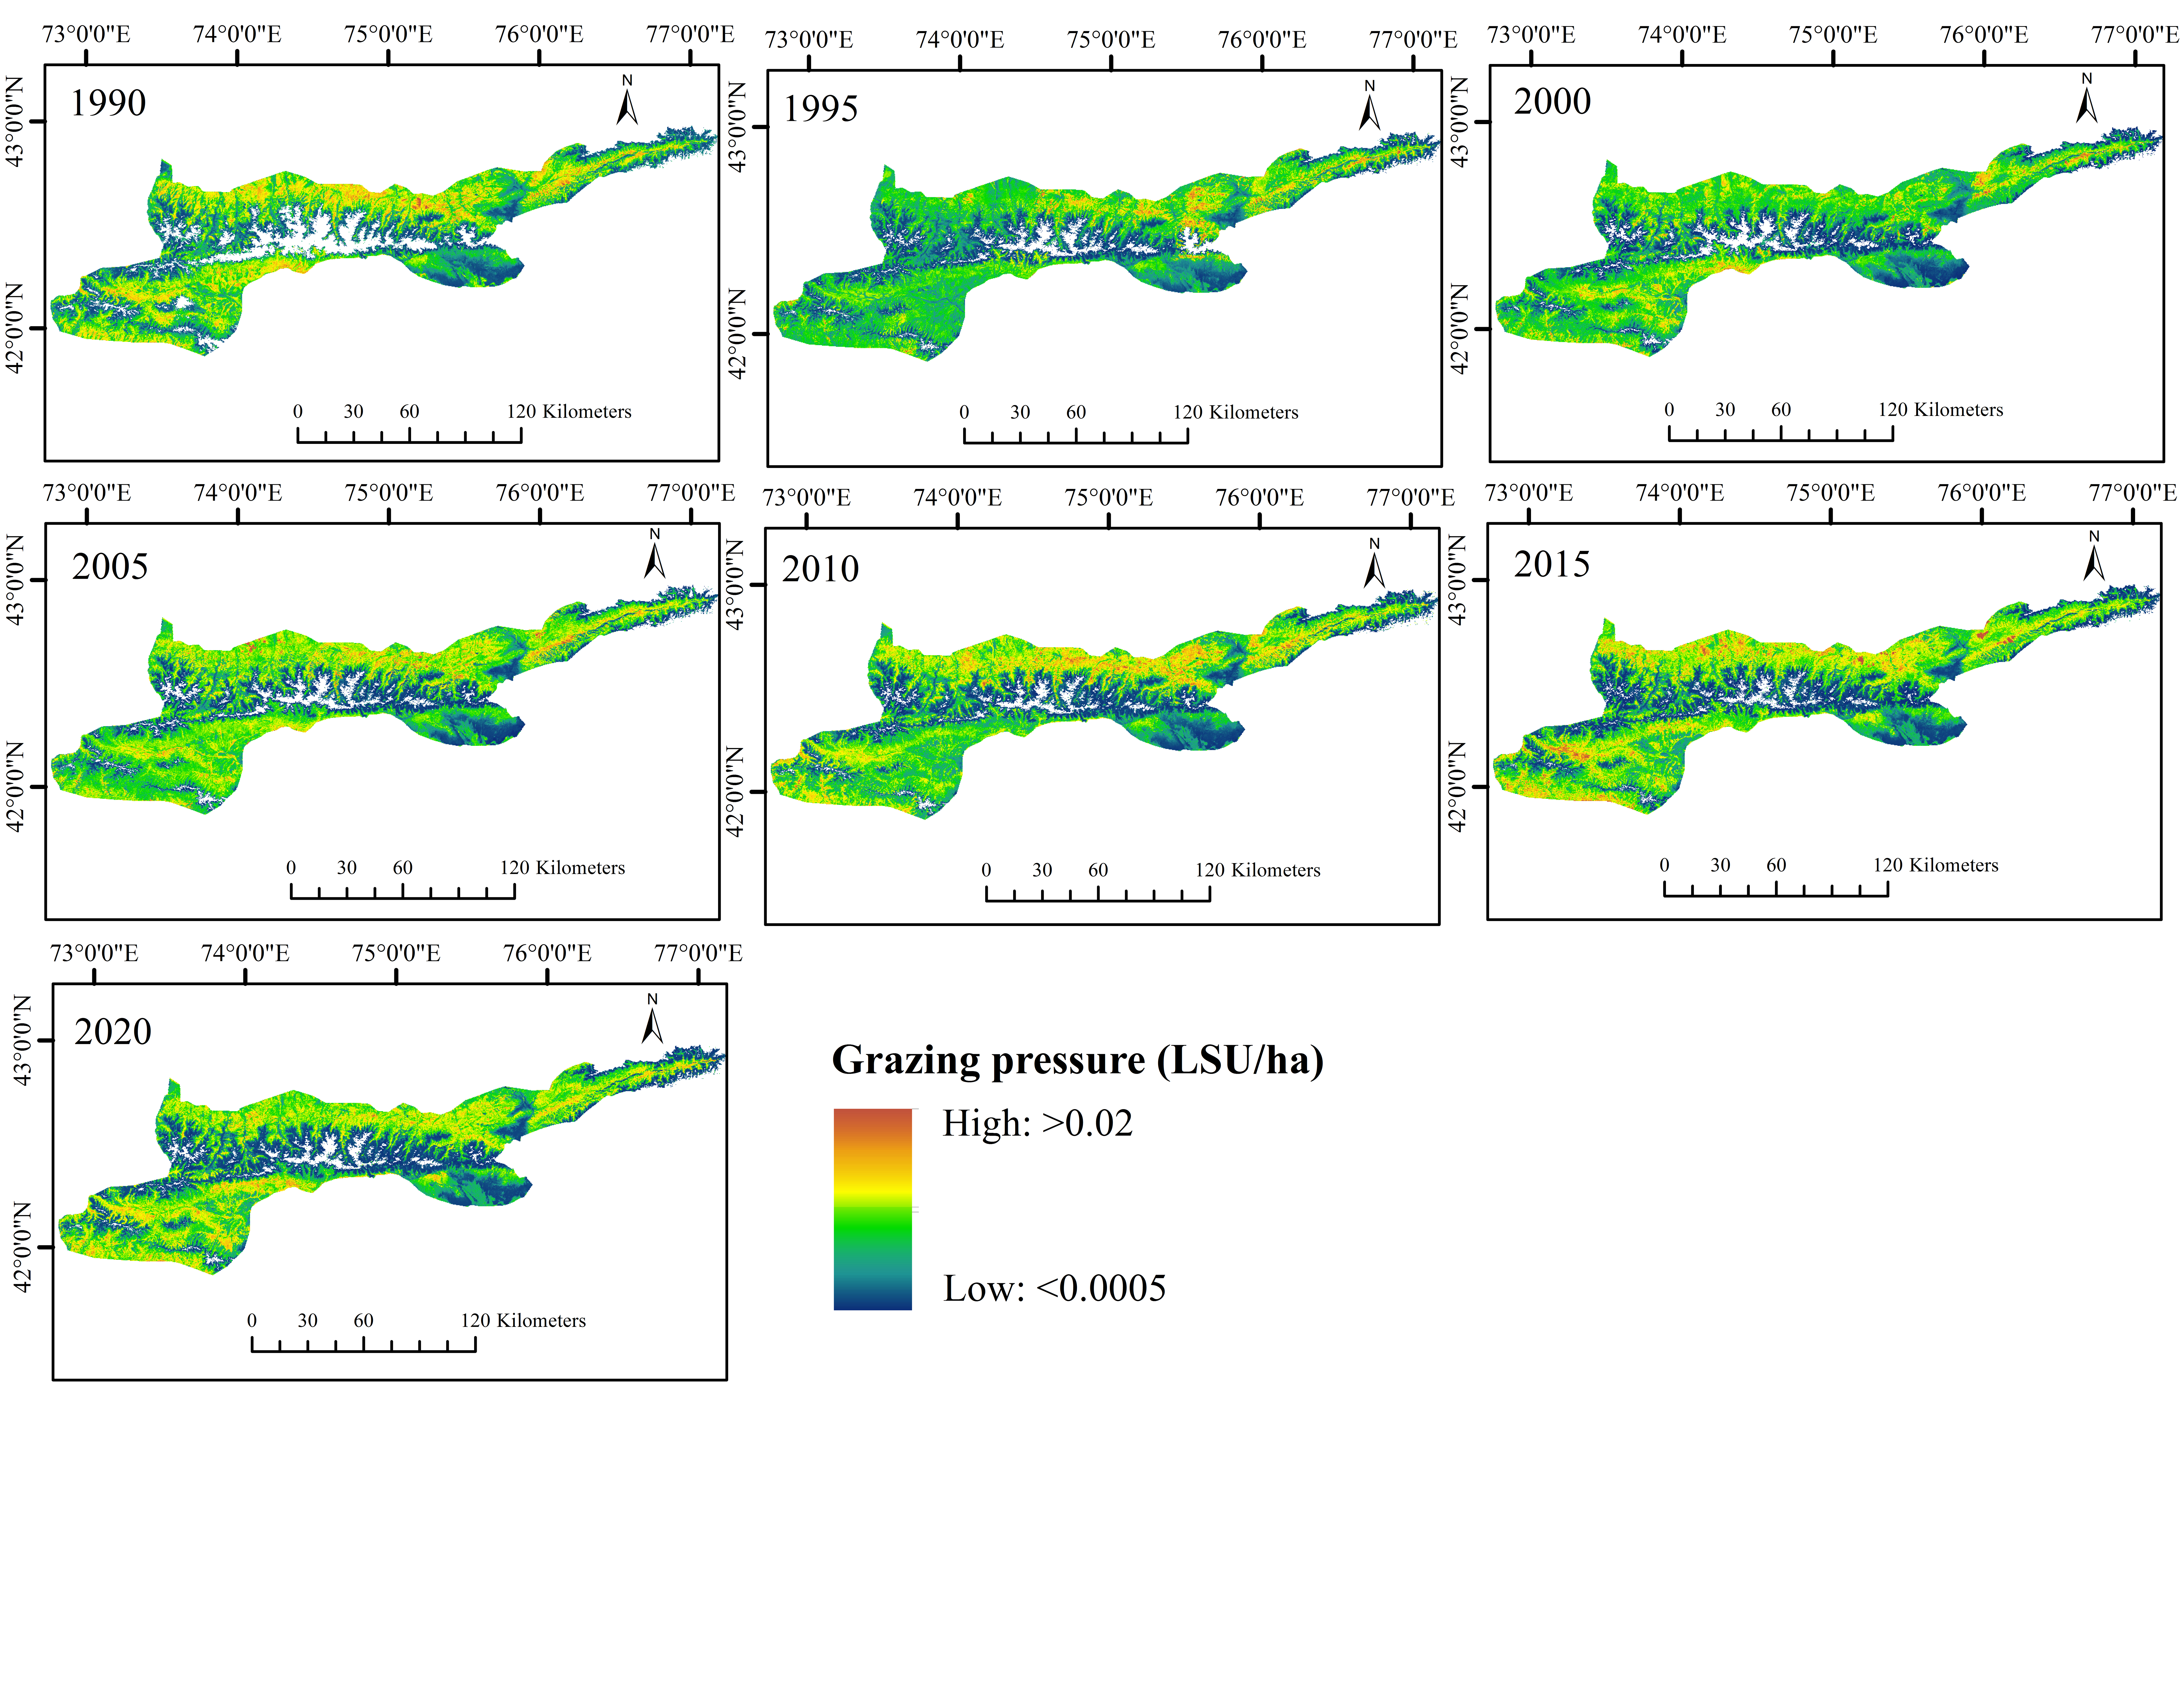 Spatial and temporal pattern of grazing pressure in Kyrgyzstan for 5-year intervals from 1990 to 2020.png